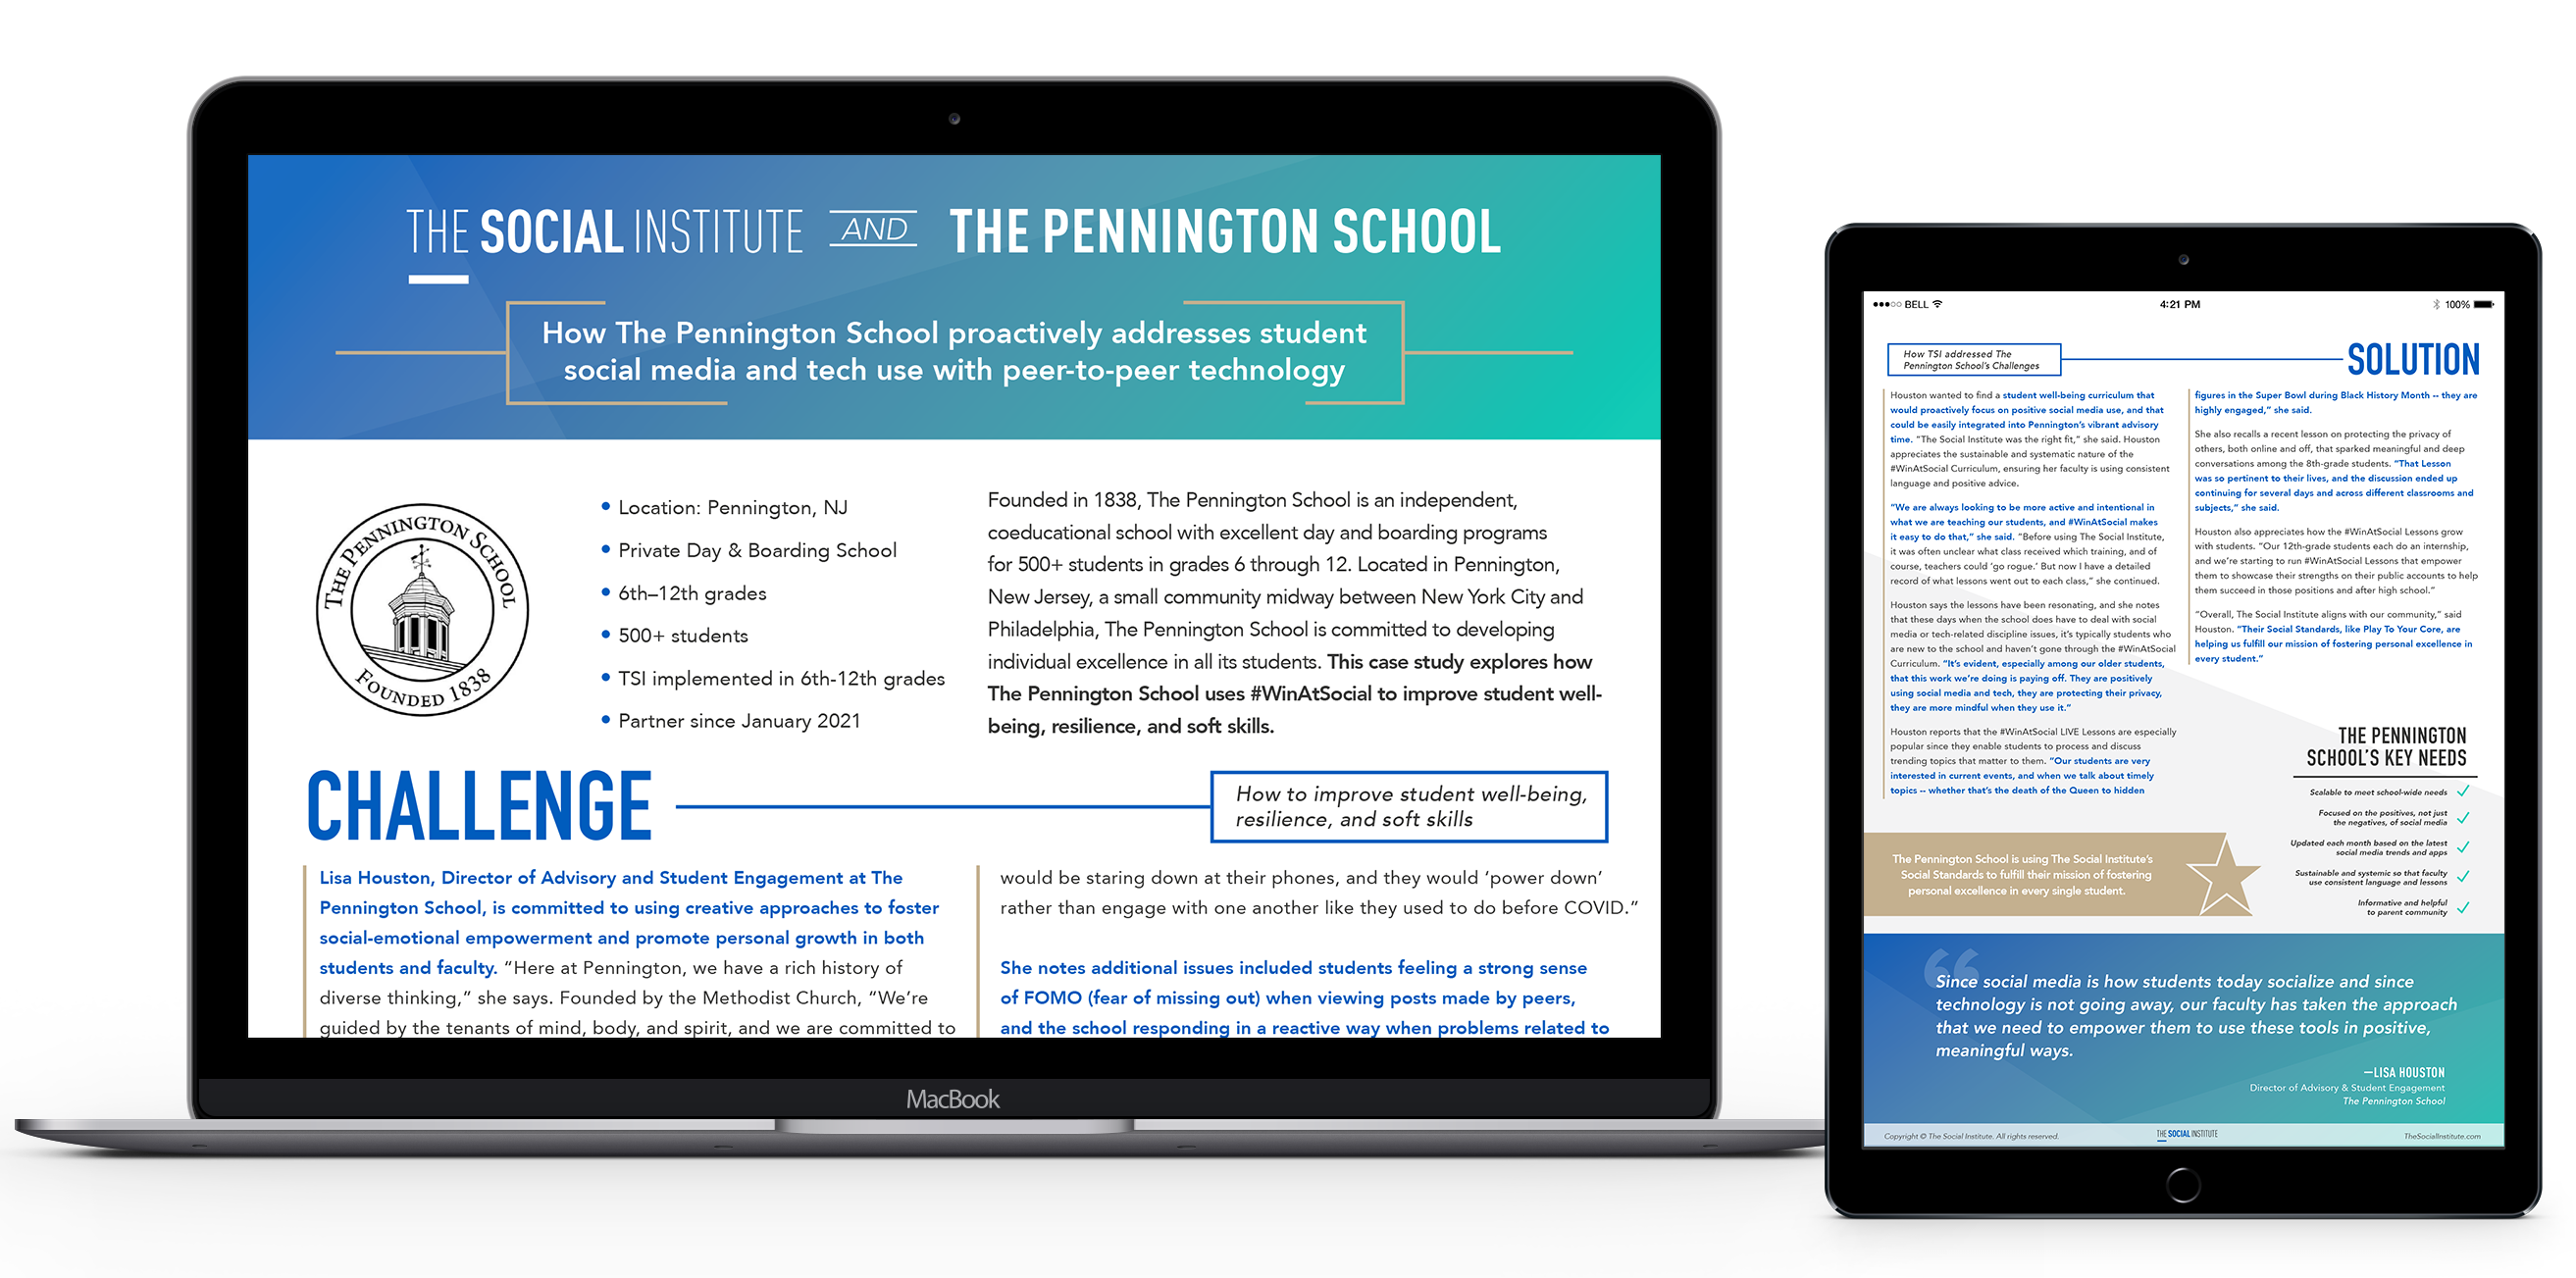 How The Pennington School proactively addresses student social media and tech use